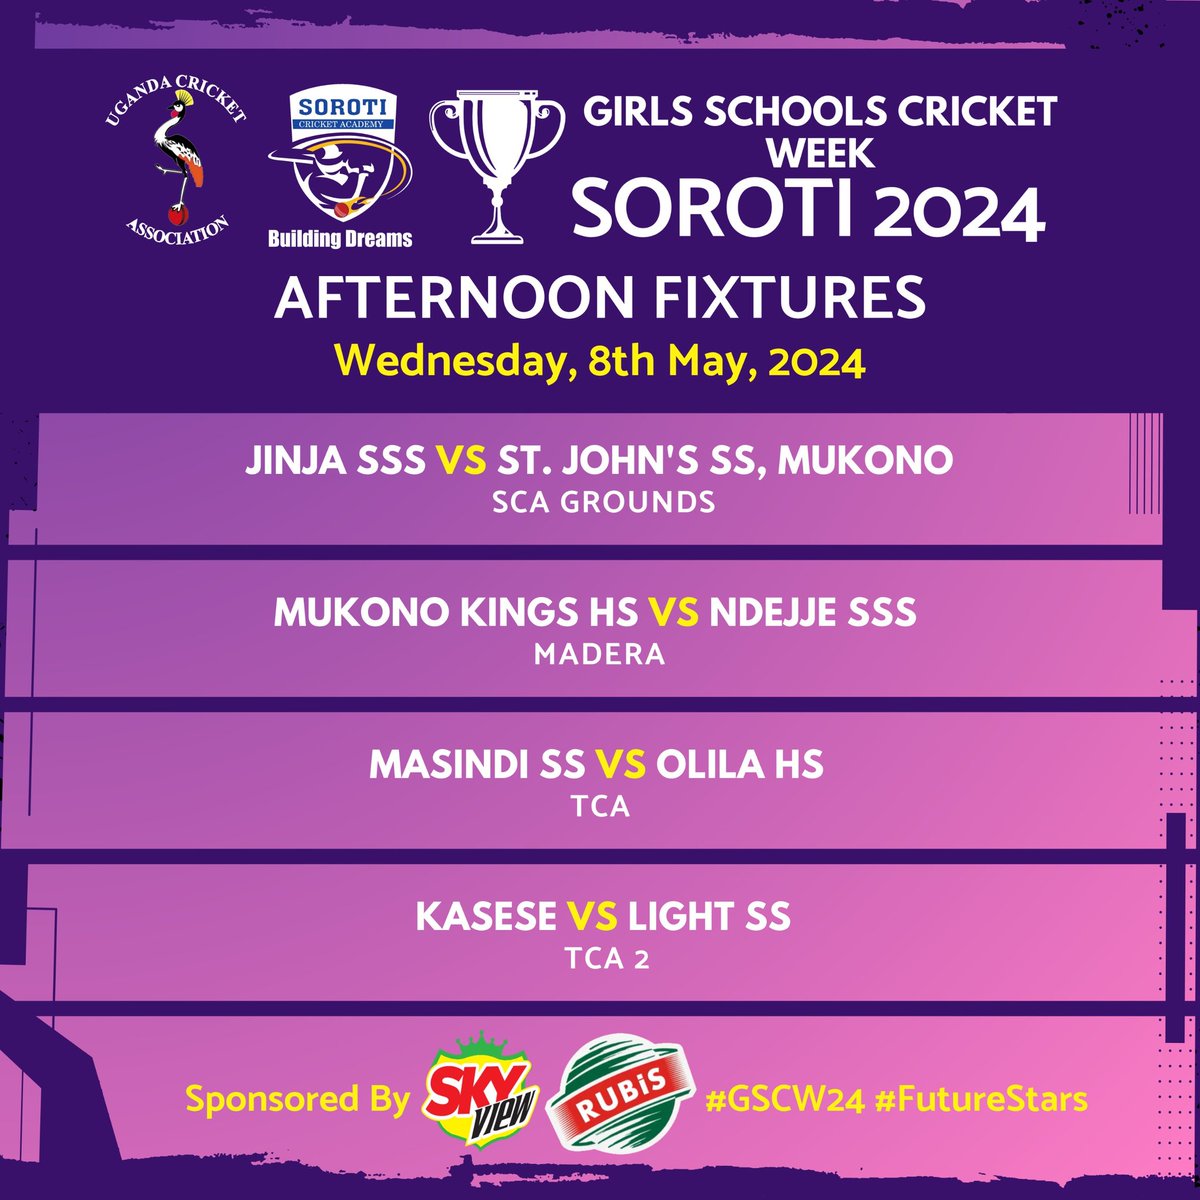 Exciting afternoon matches ahead!

Which one catches your eye?

 #GSCW24 #FutureStars #BuildingDreams